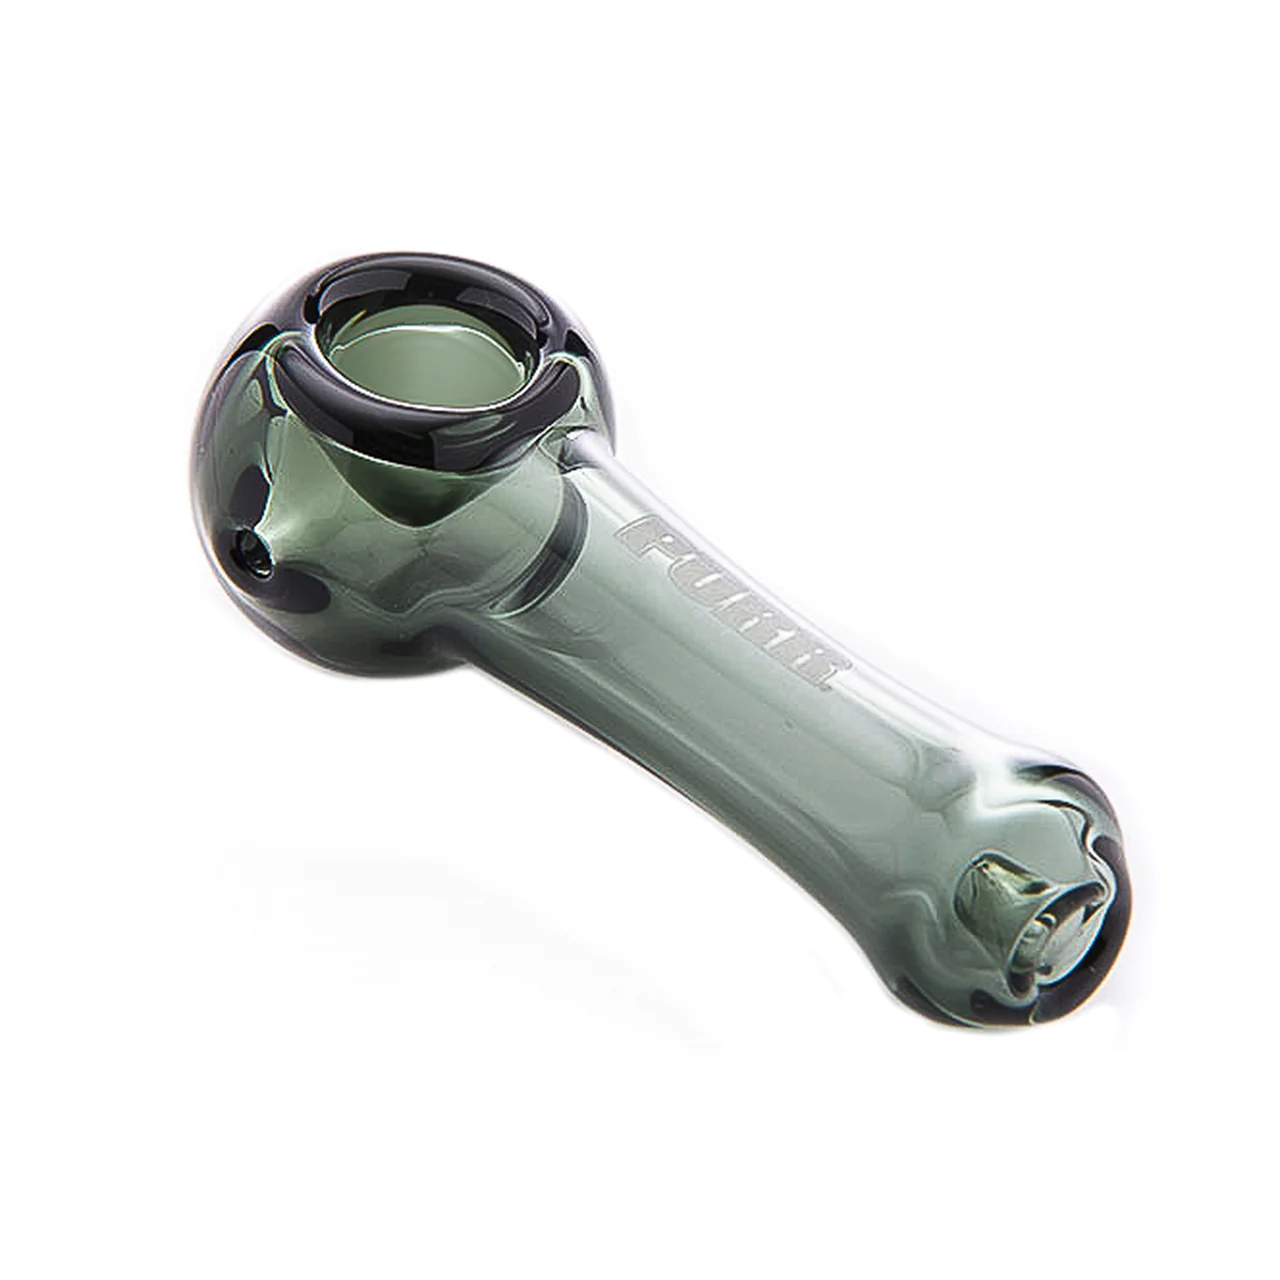 PURR Glass Ash Catcher Spoon Pipe lateralus-glass